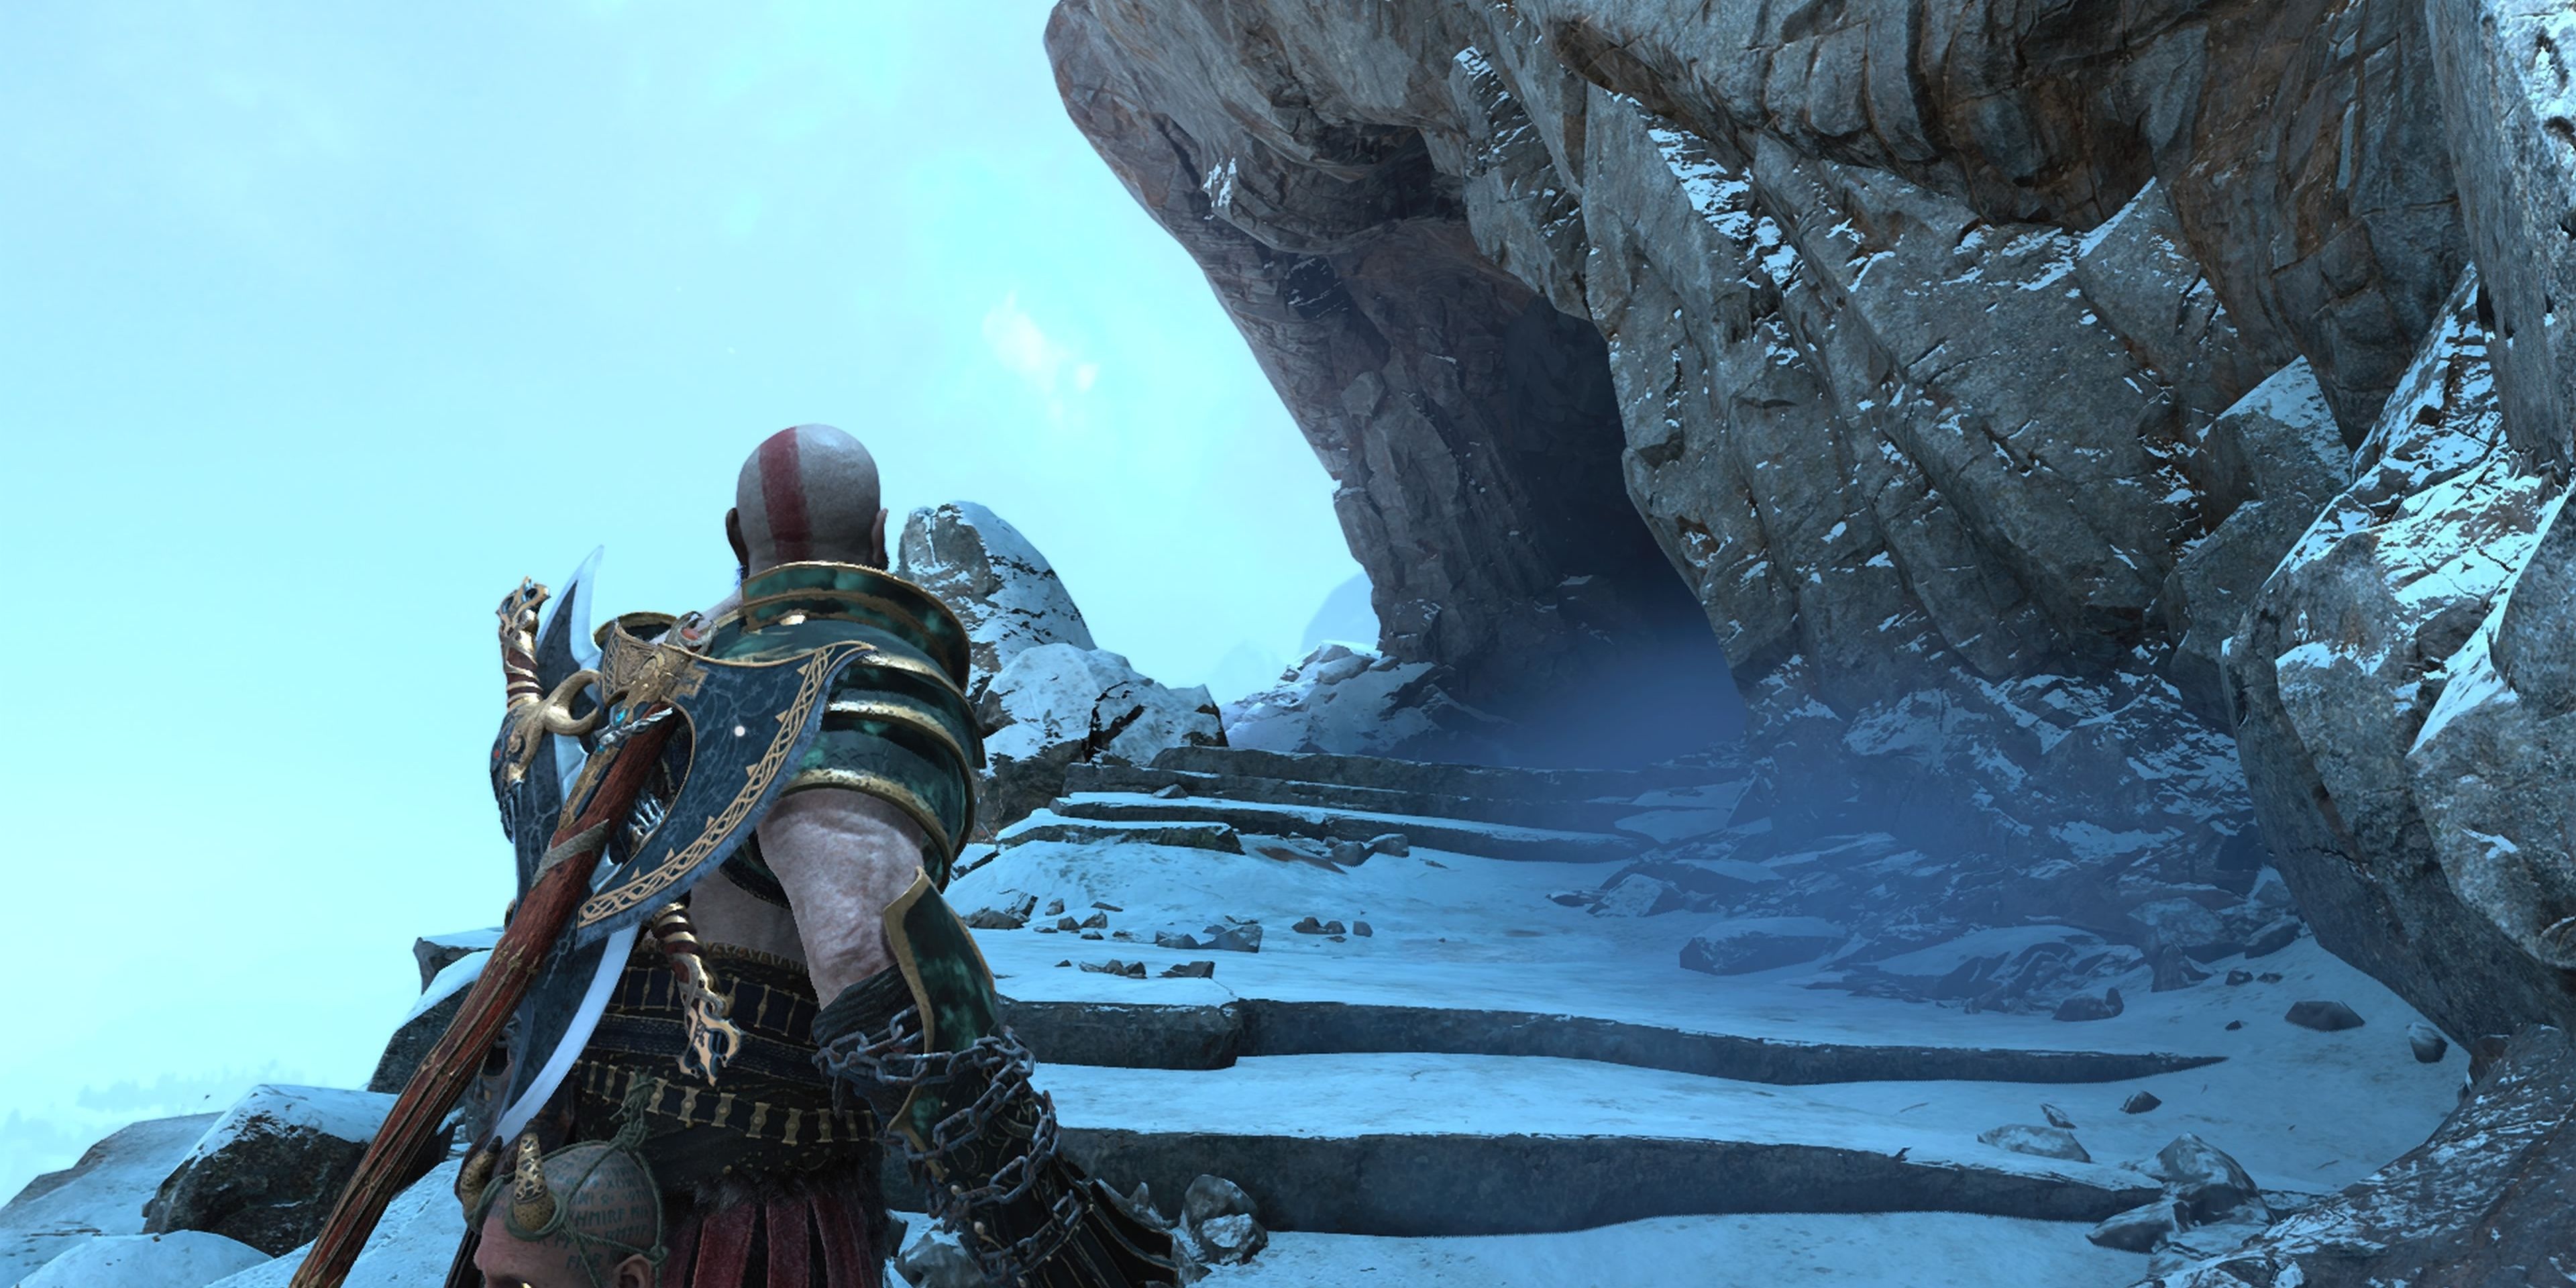 Walking along the side of the mountain in God Of War searching for Don't Blink Treasure